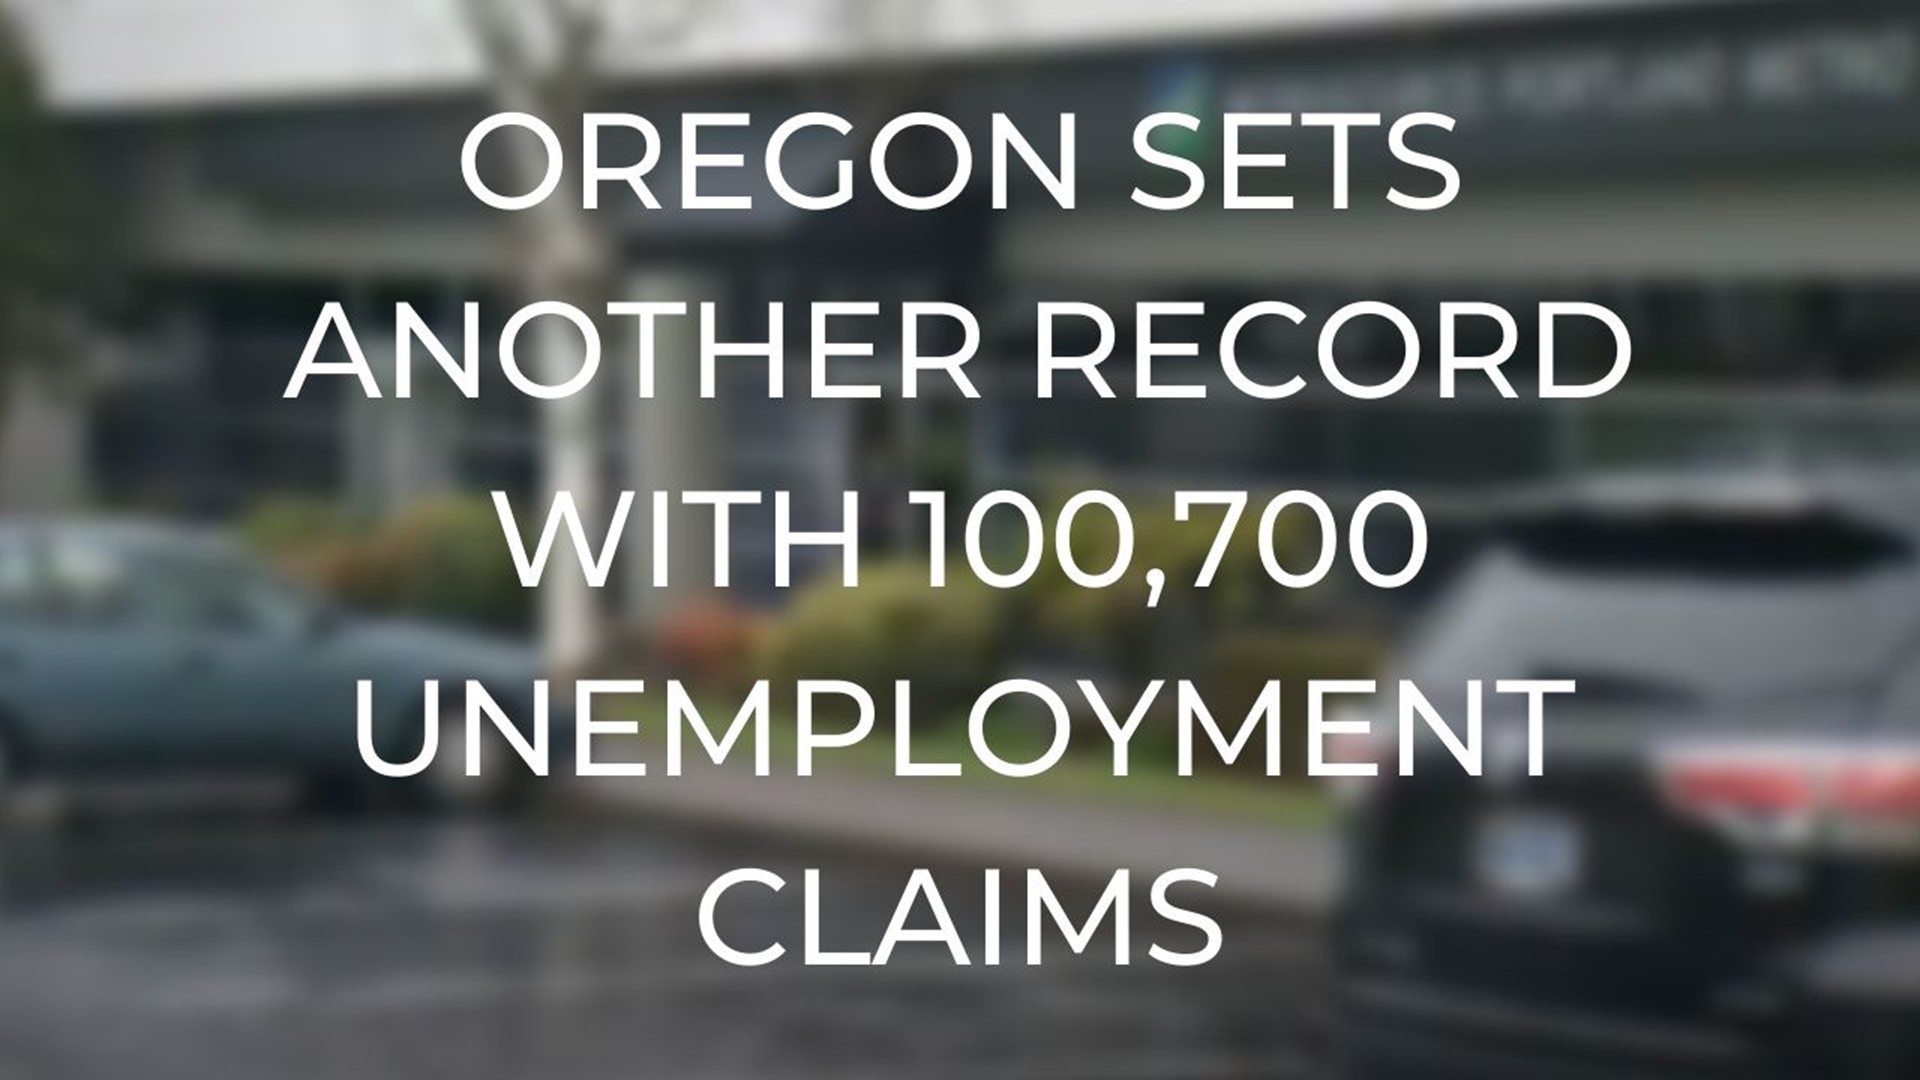 269,900 Oregonians have filed unemployment claims in the past three weeks.